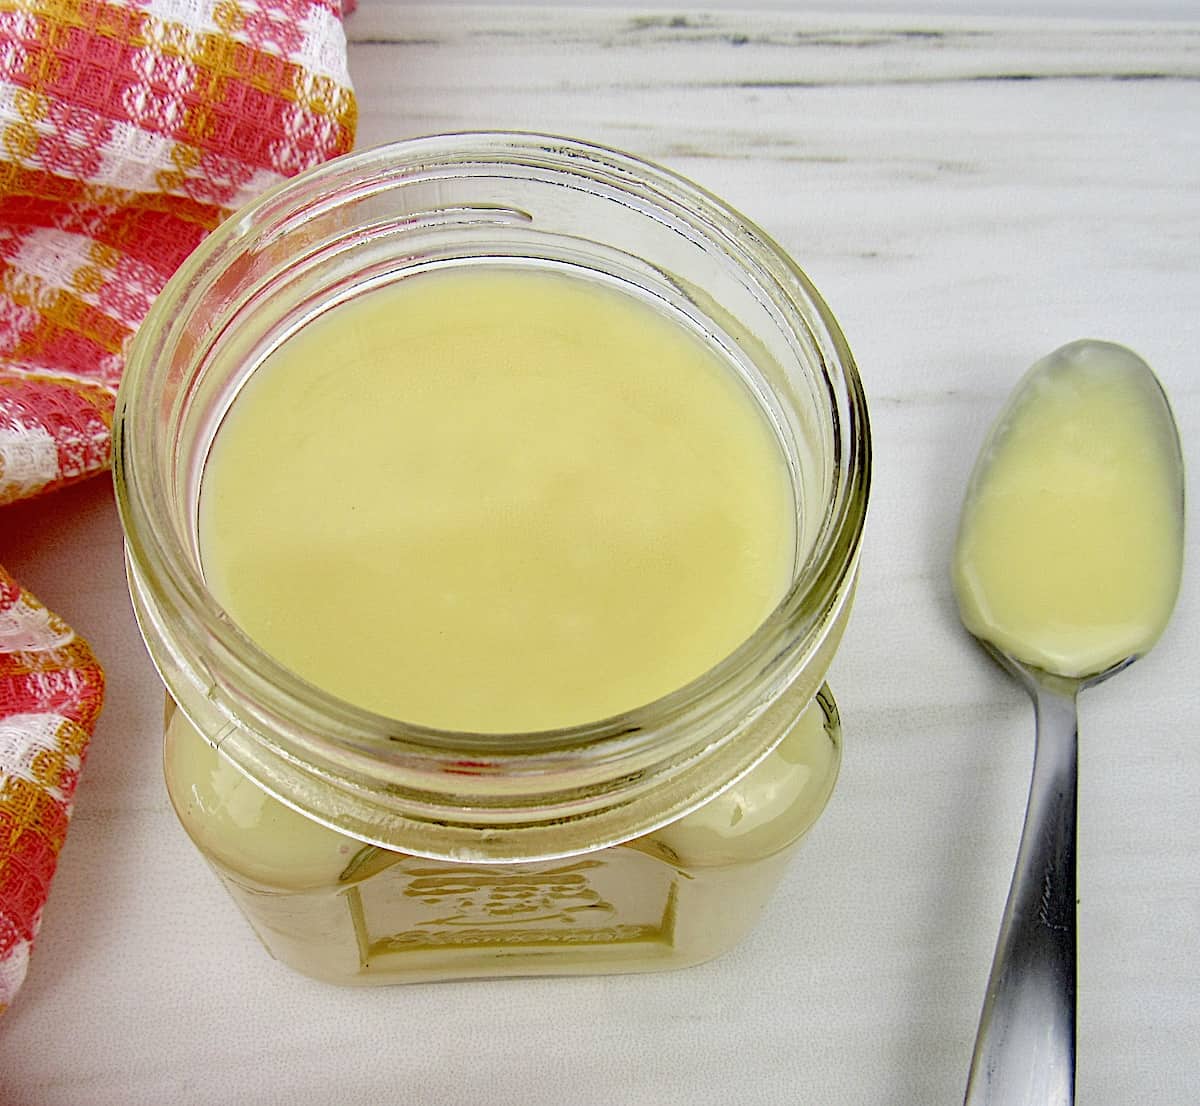 Keto Sweetened Condensed Milk in open jar with spoonful on side